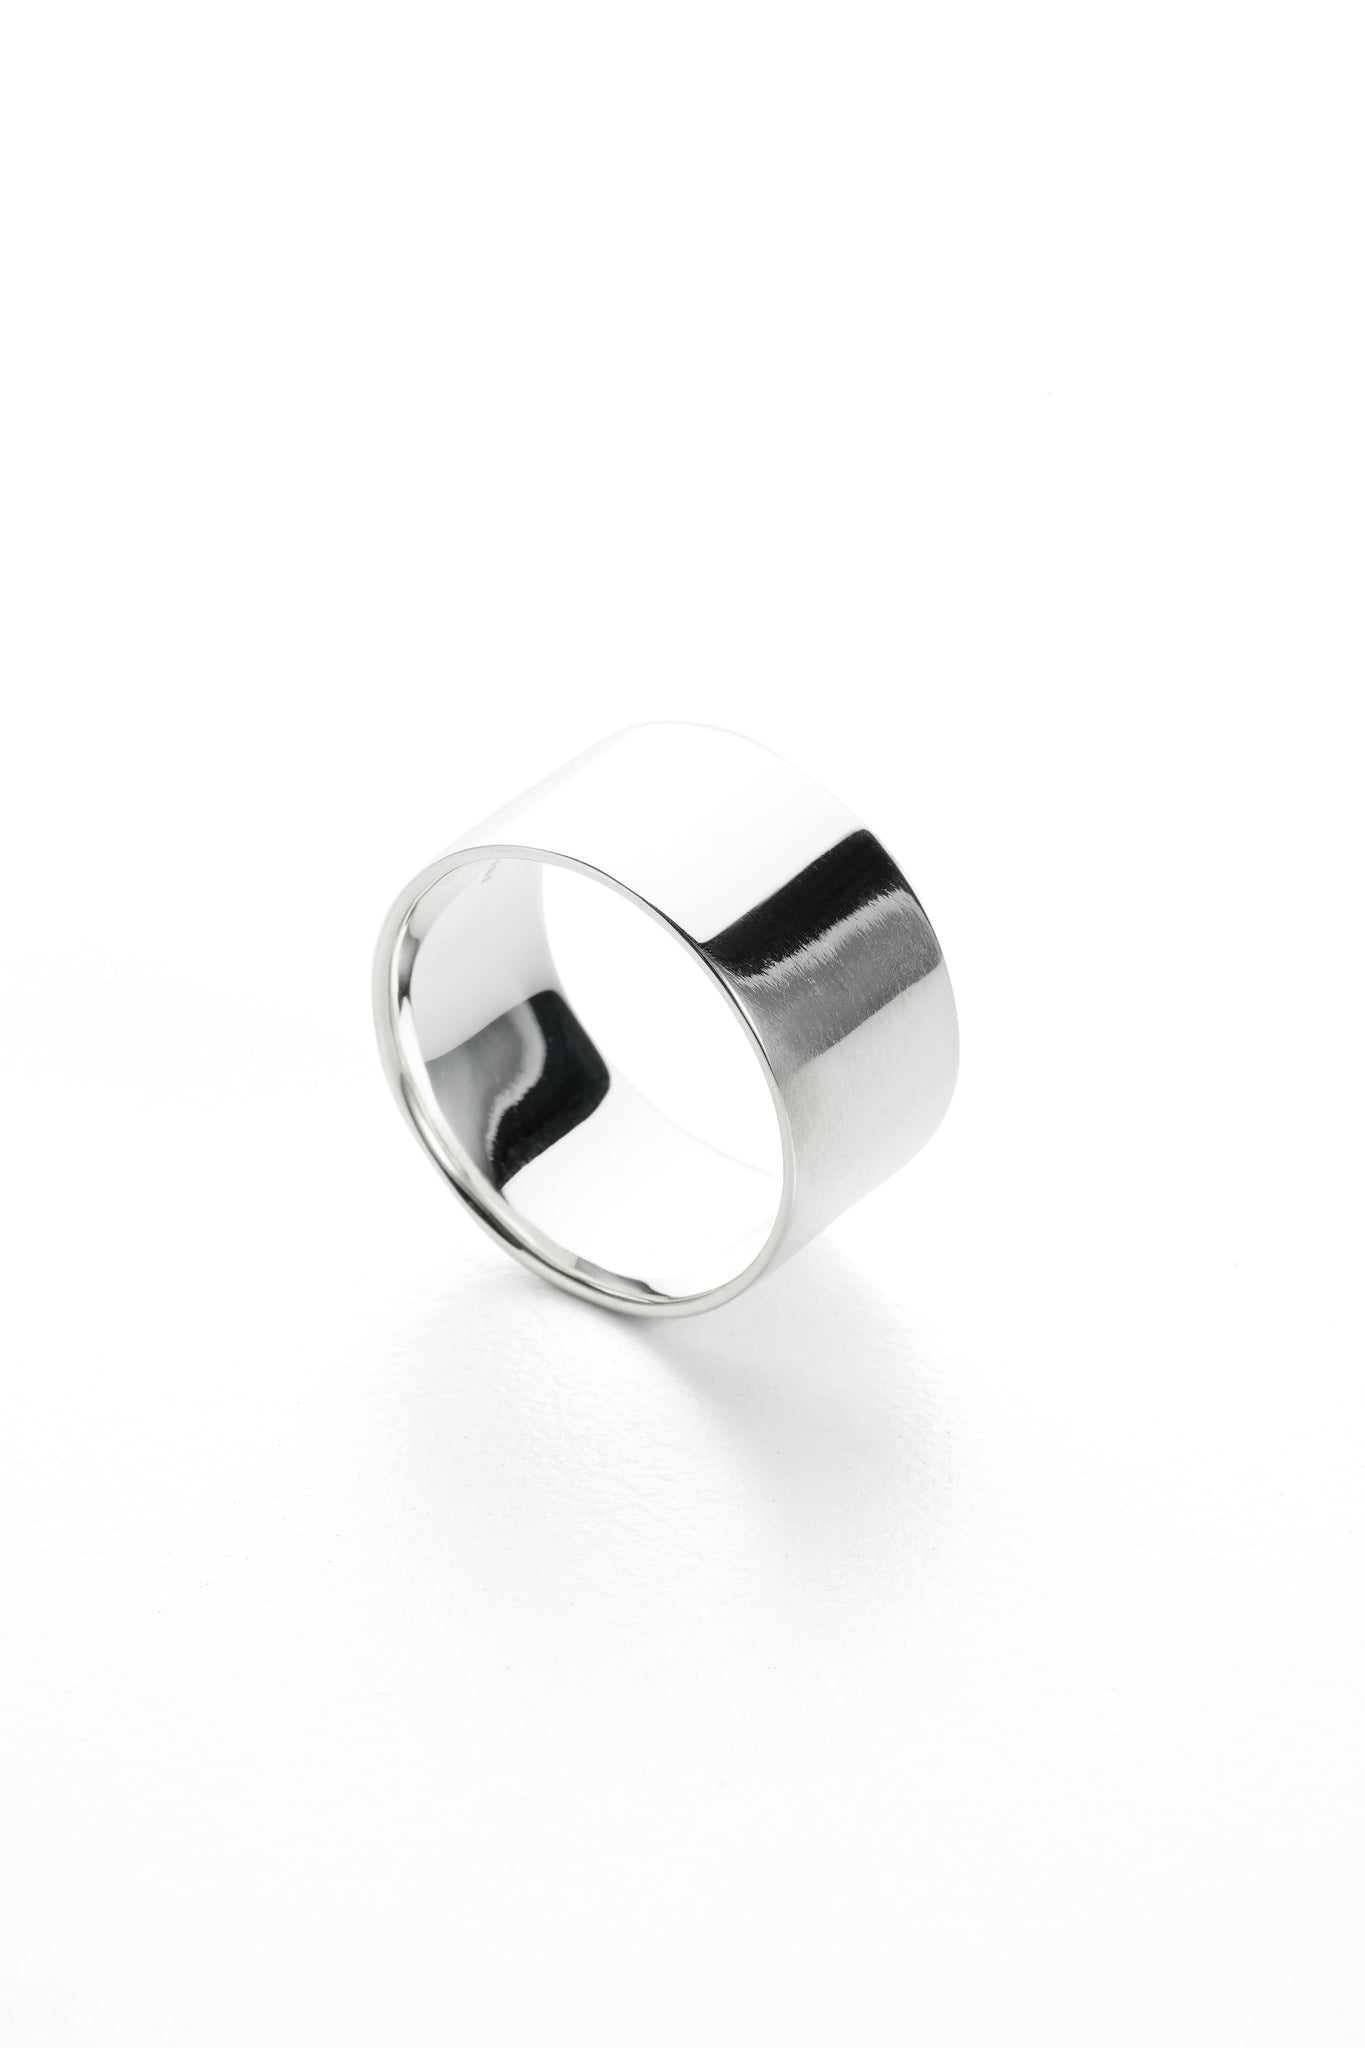 PT RING 10mm (SILVER925)